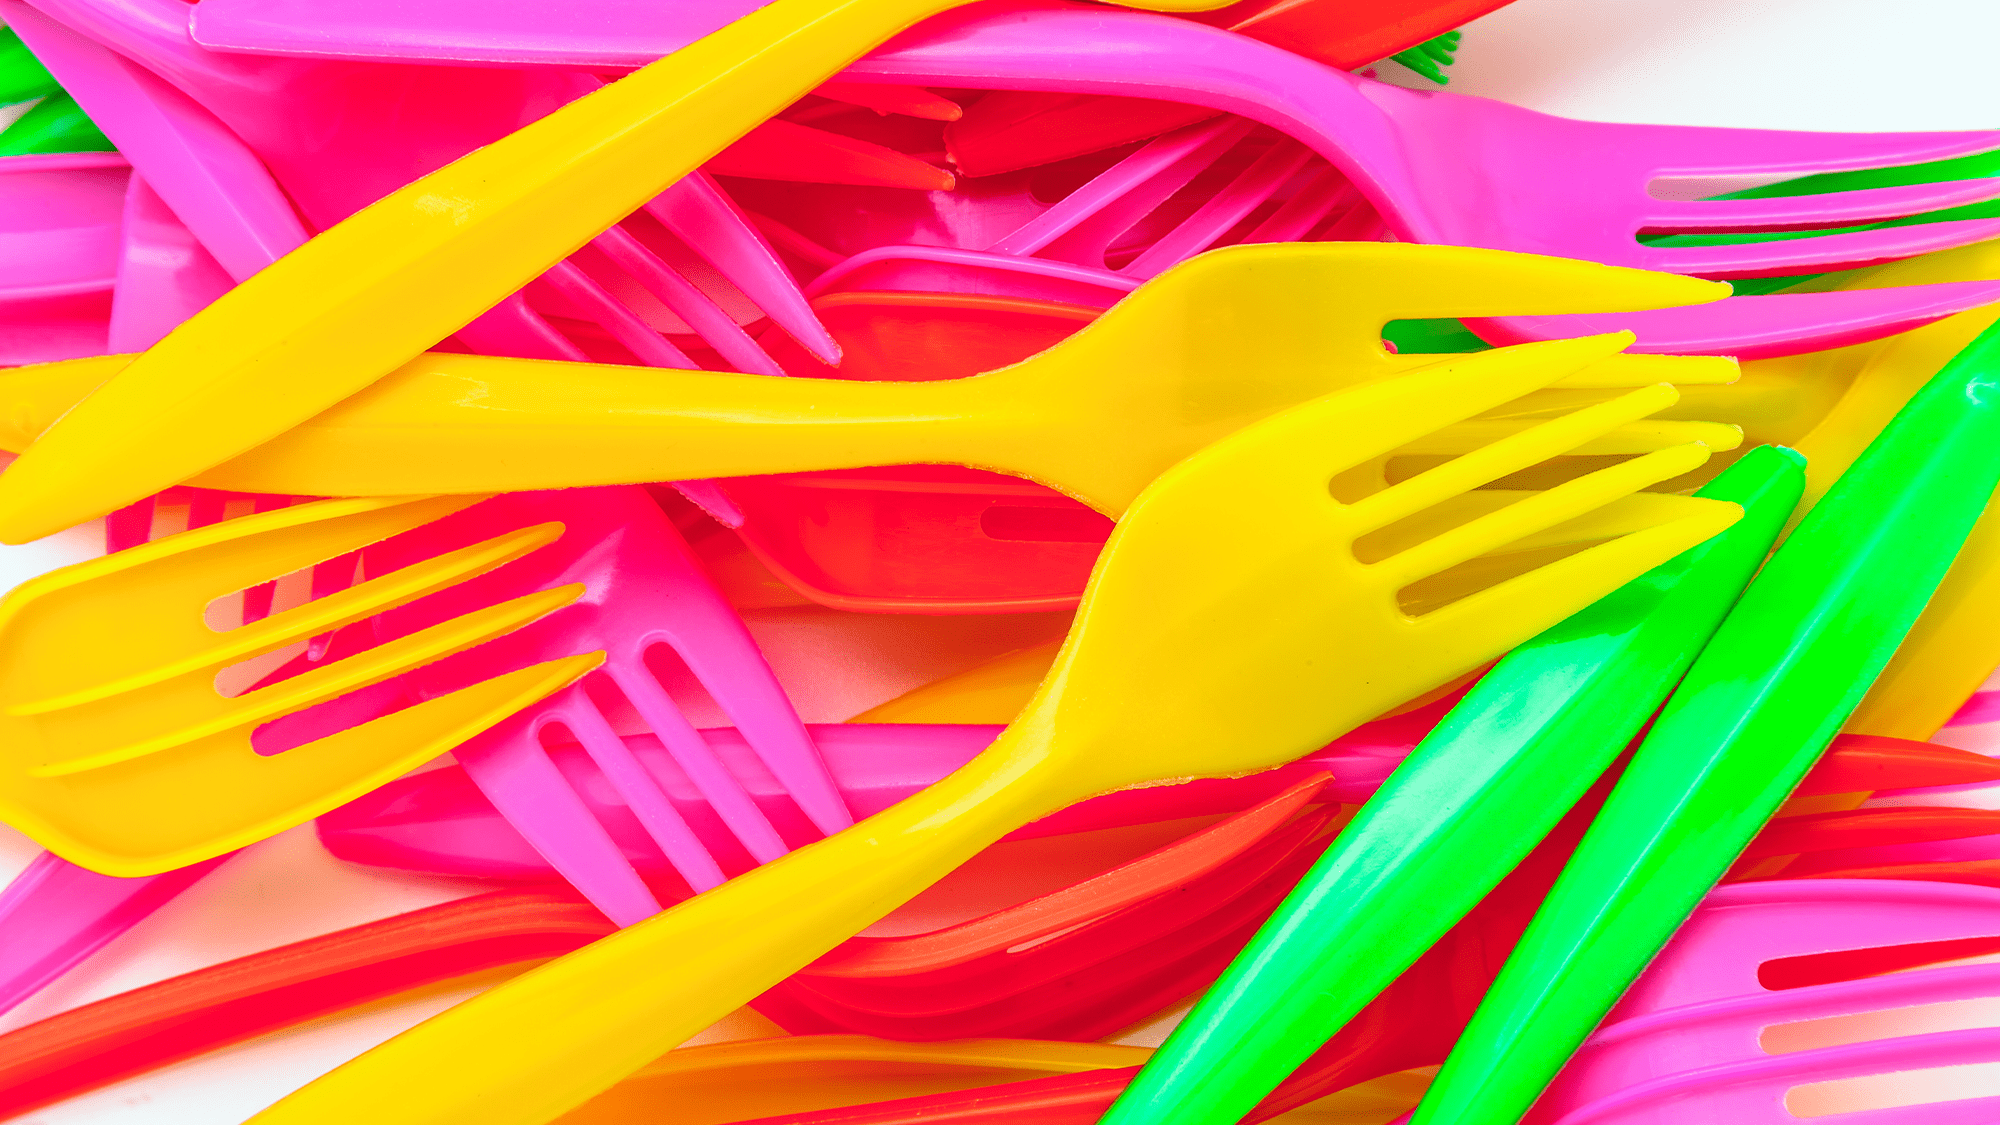 Millions of tons of waste could be eliminated by ‘nudging’ consumers to skip the plastic fork